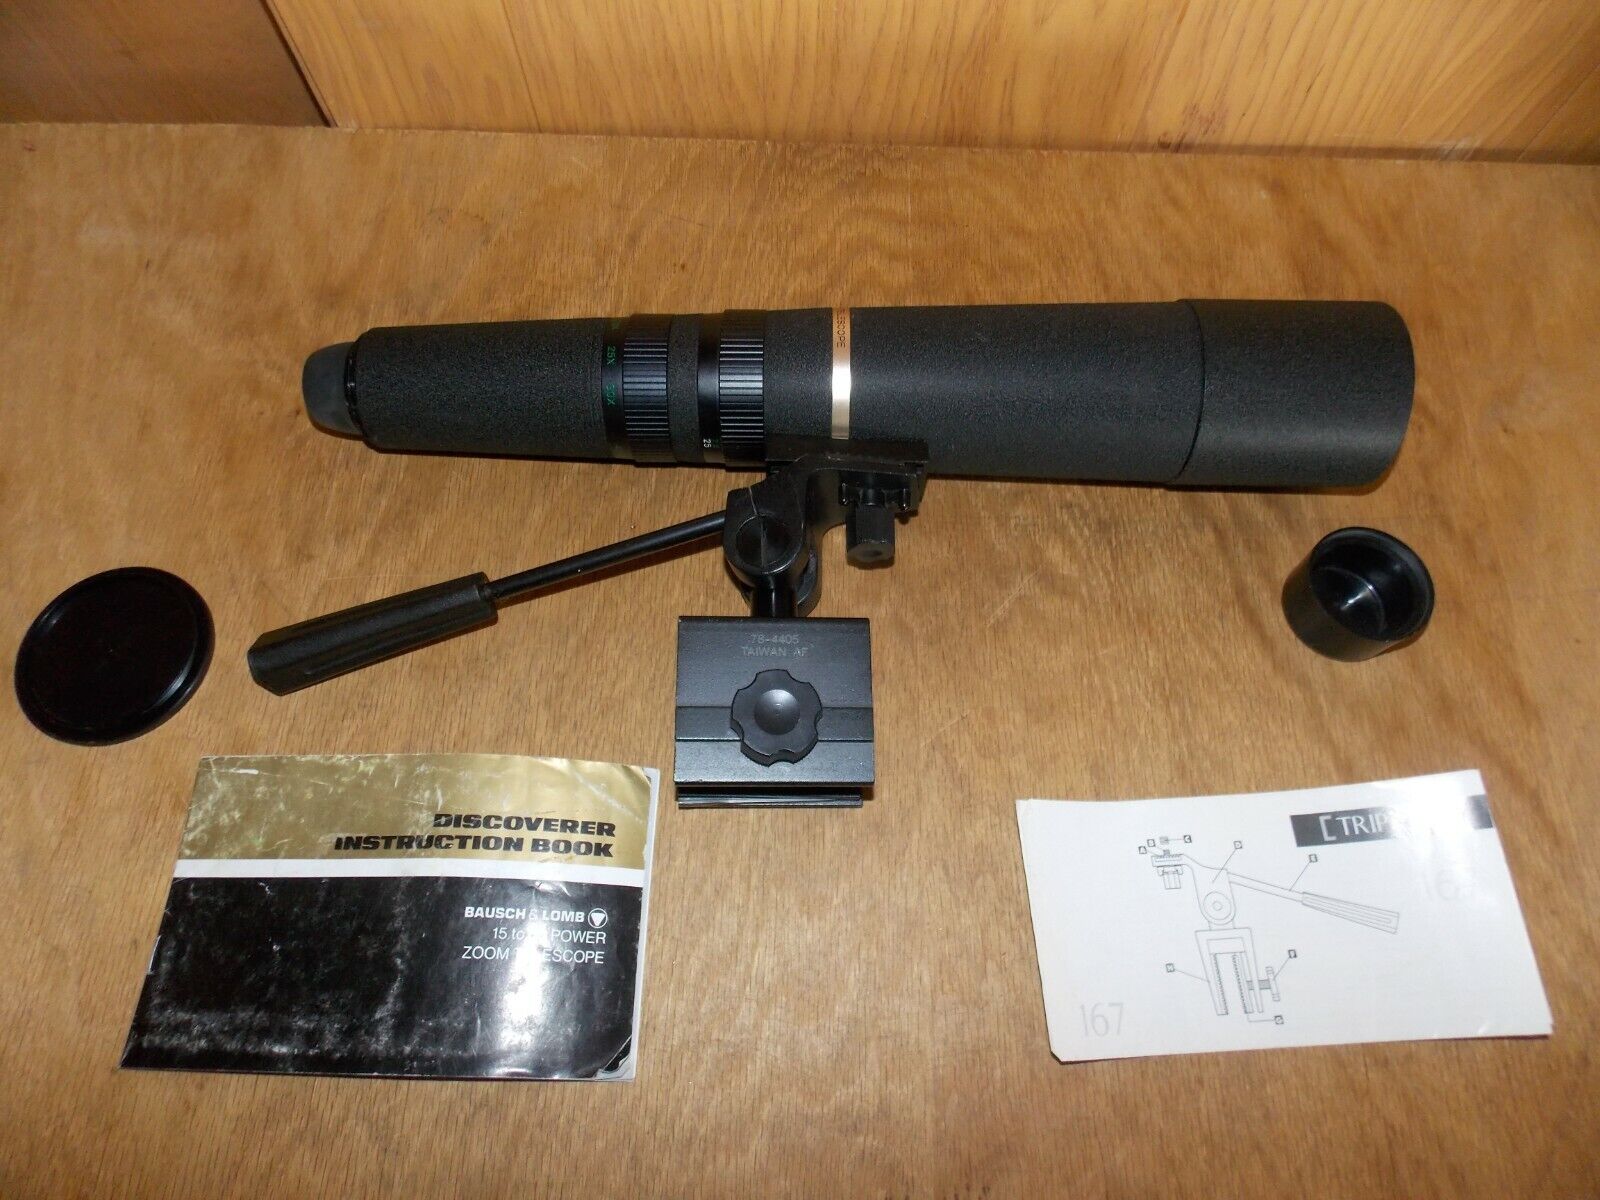 Bausch Lomb 15 to 60 Power ZOOM Telescope W/Bushnell Mounting Piece V-CLEAN 4/22